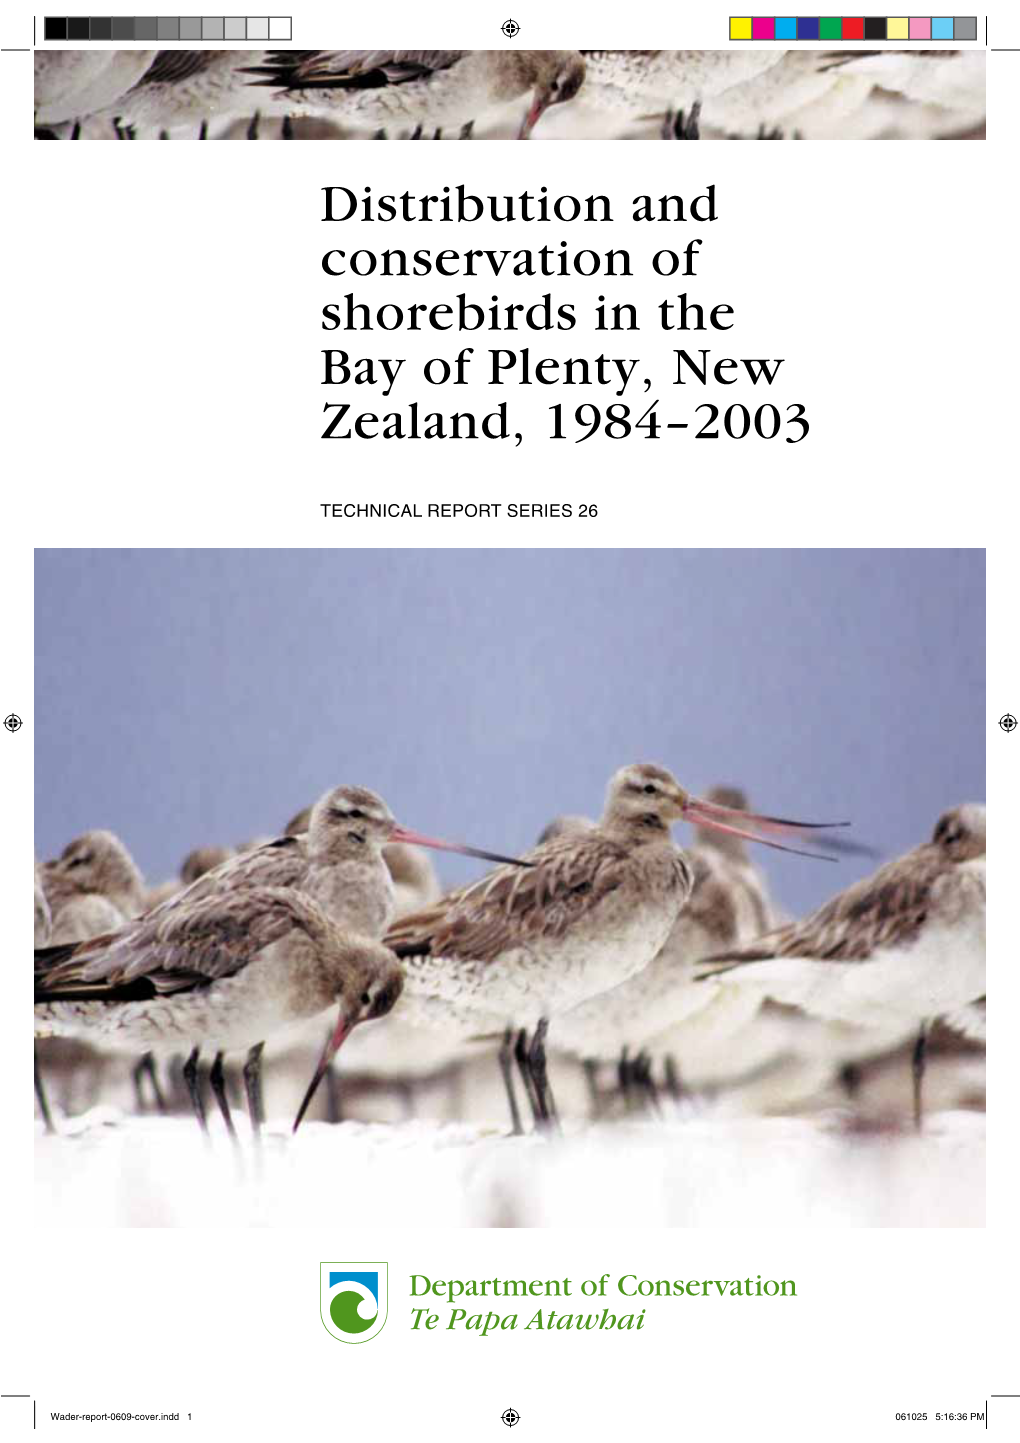 Distribution and Conservation of Shorebirds in the Bay of Plenty, New Zealand, 1984-2003